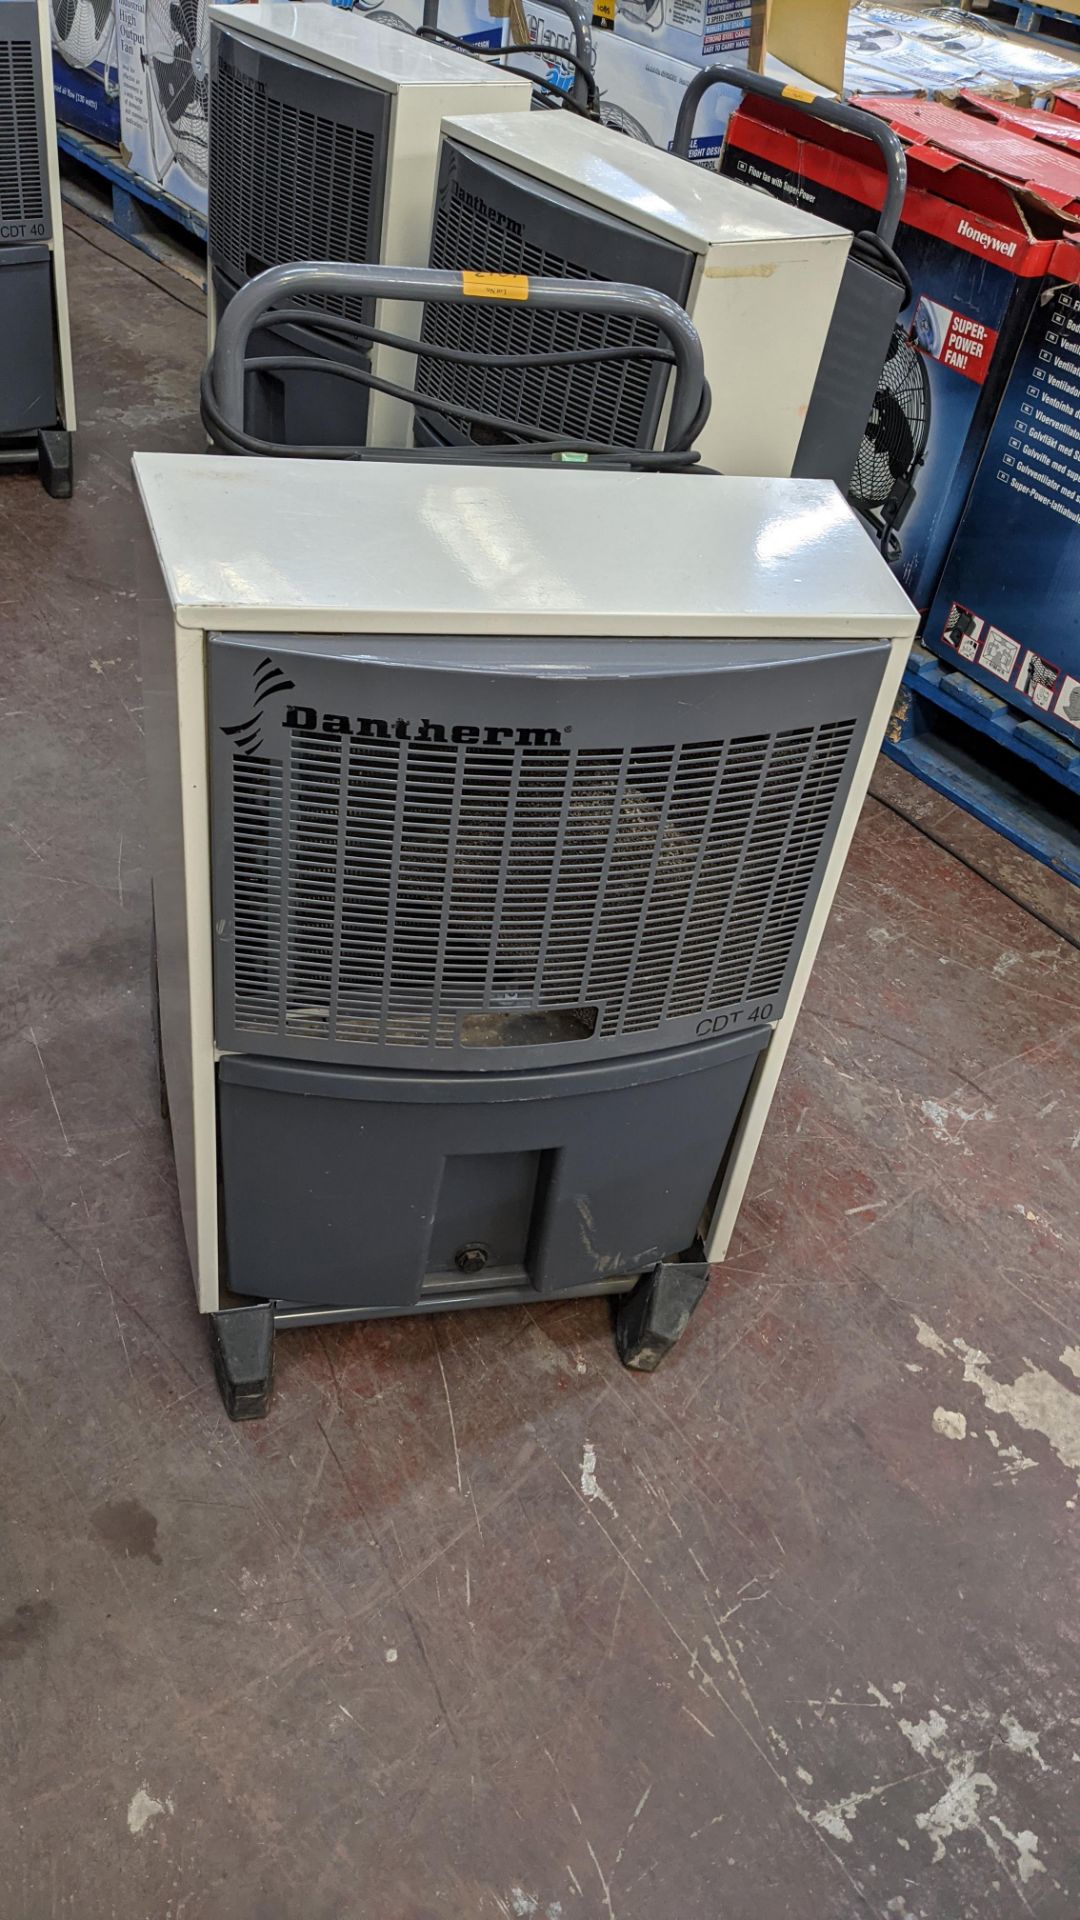 Dantherm model CDT40 dehumidifier. 10,837 recorded hours